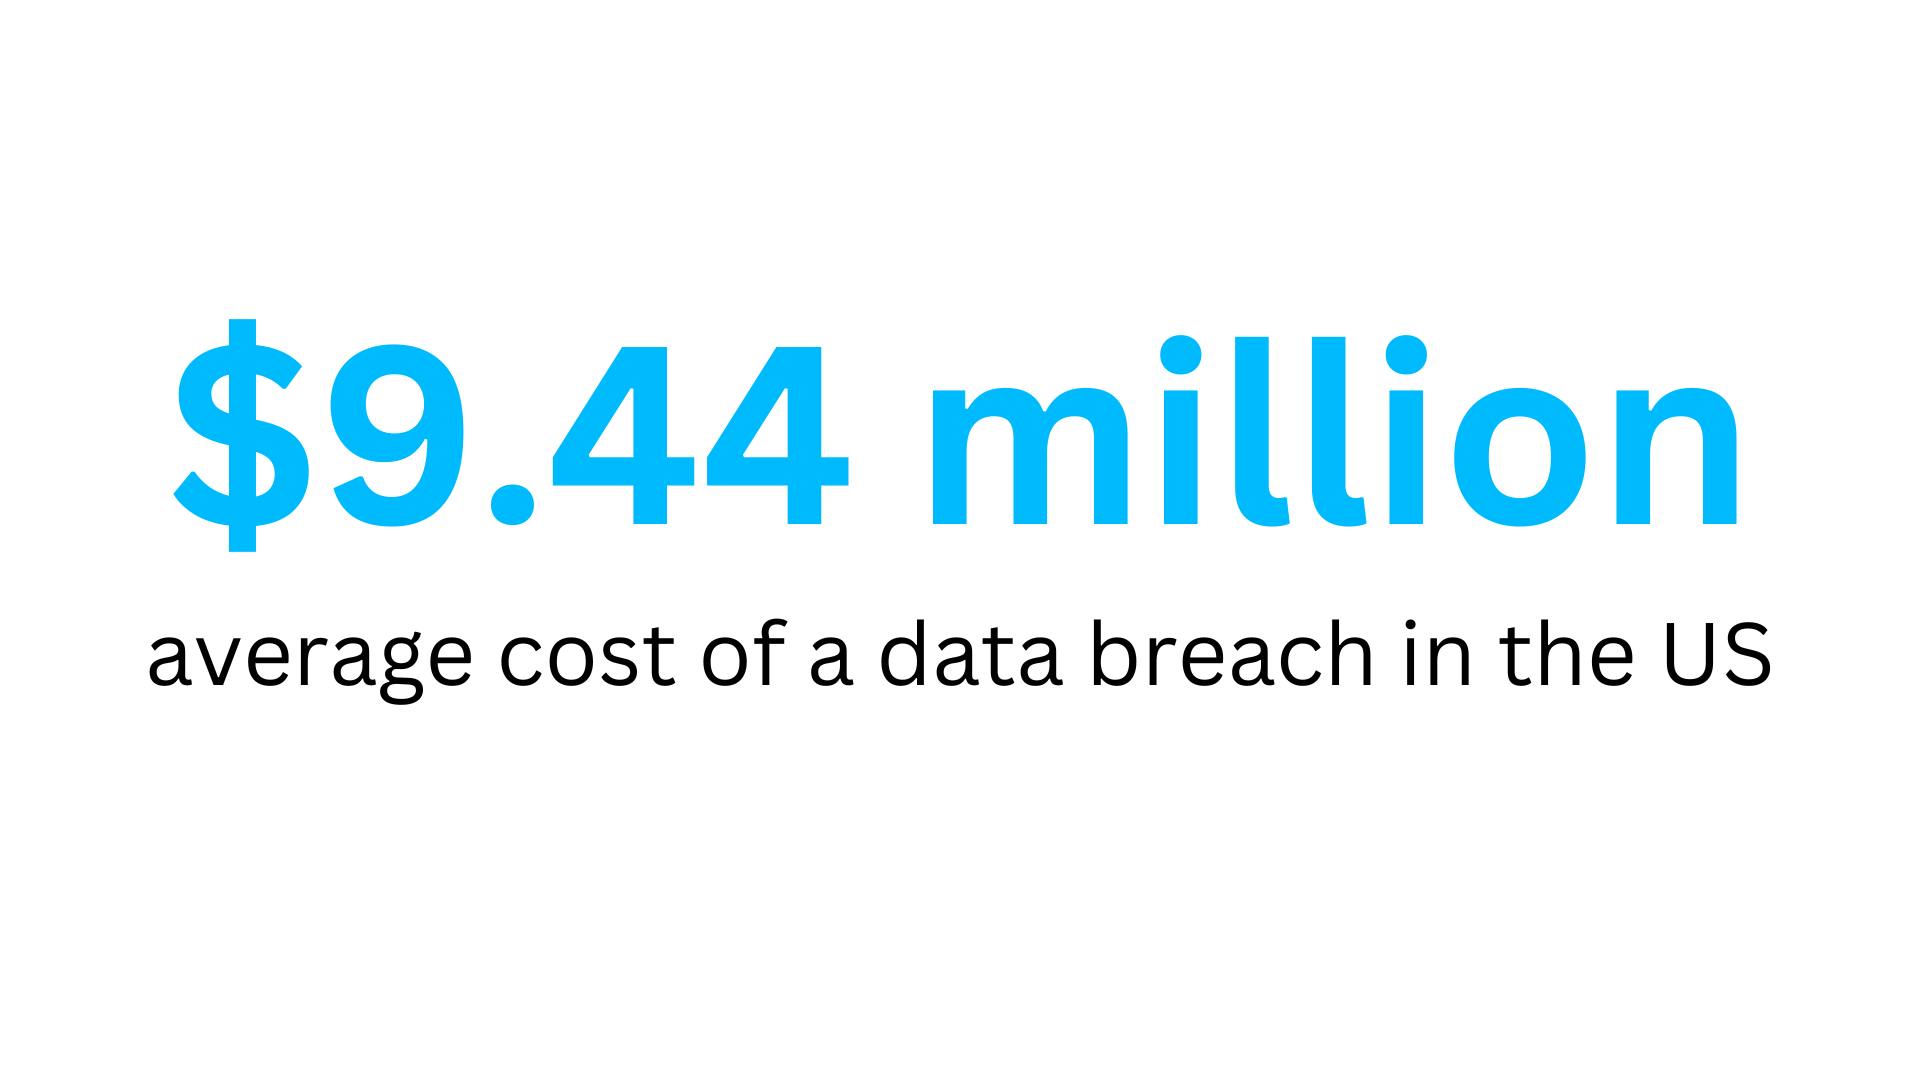 Cybersecurity Statistics  -The financial impact of a data breach